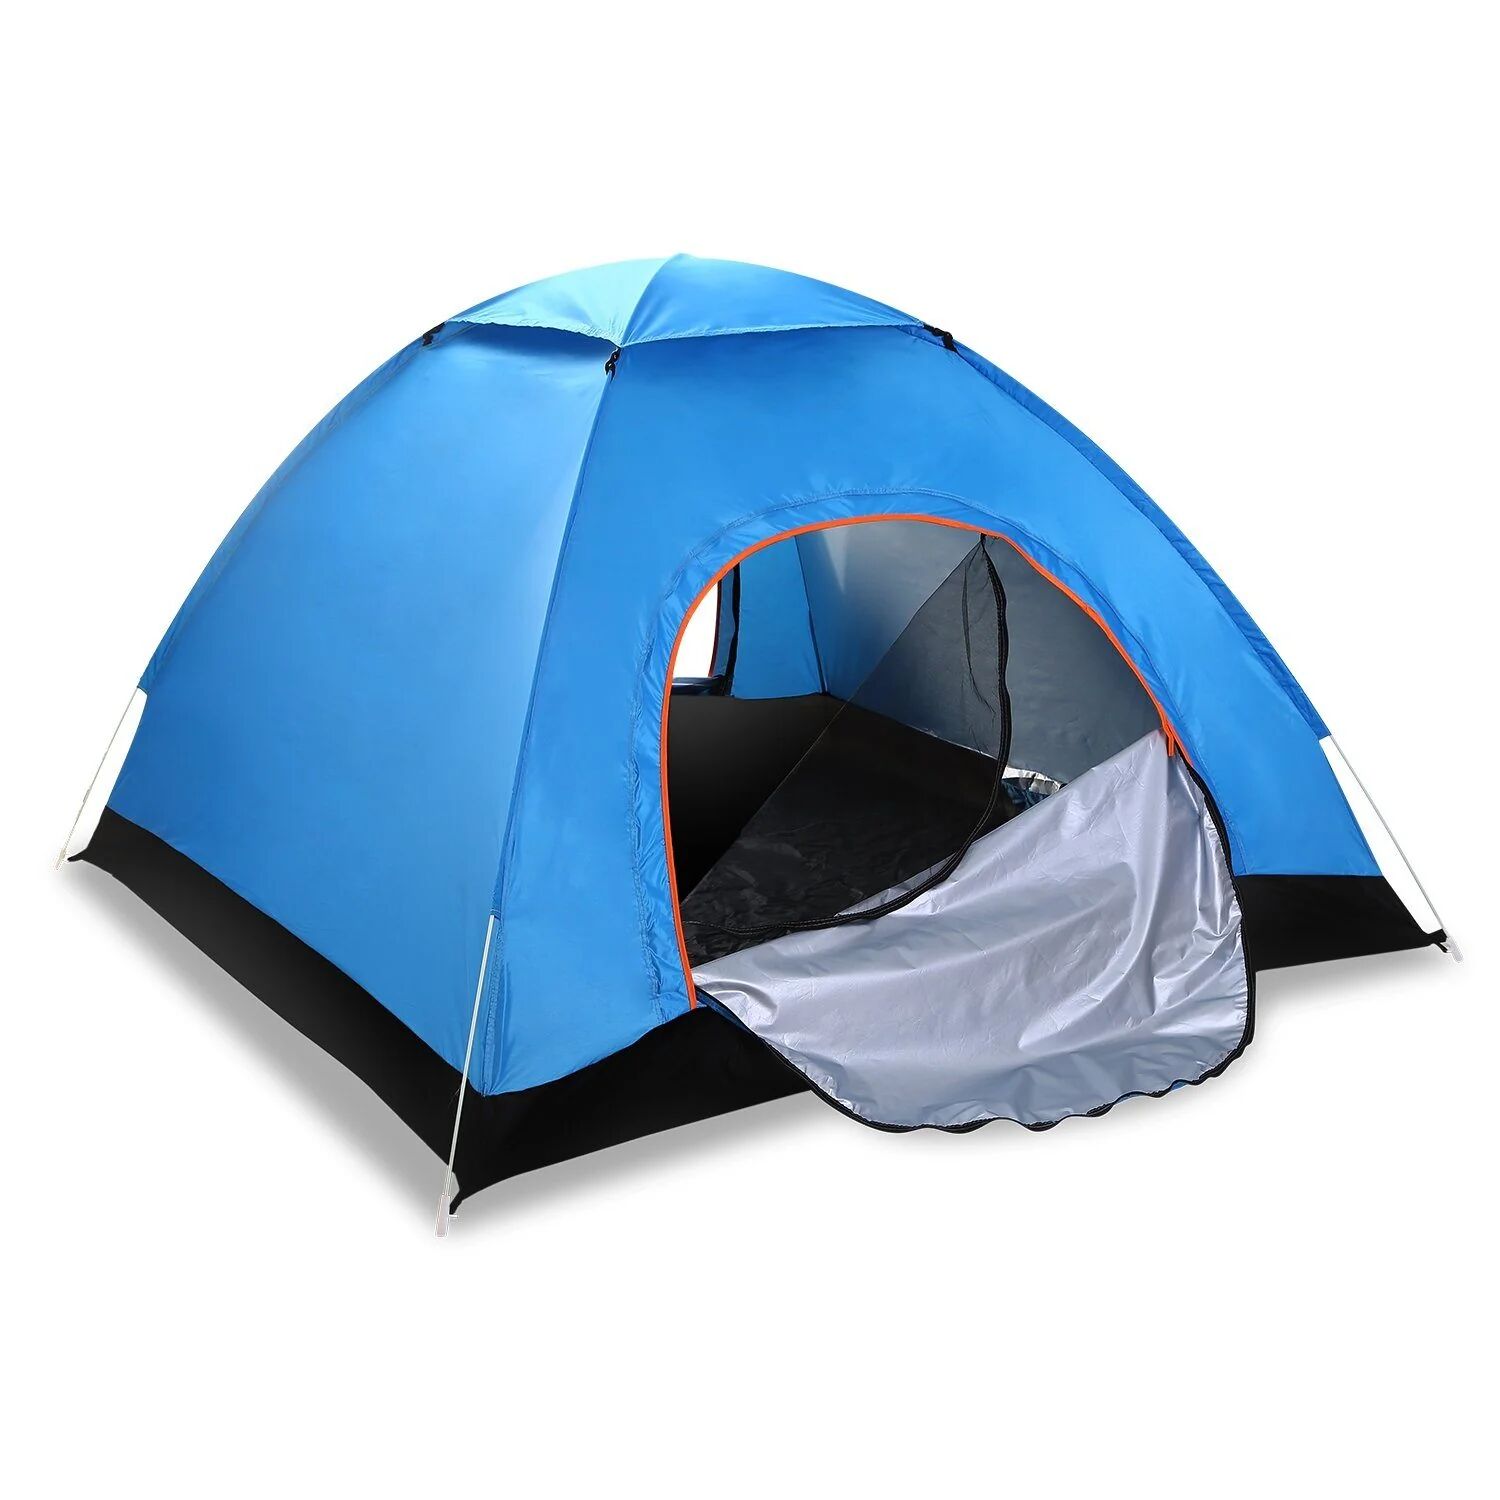 DailySale 4 Persons Camping Waterproof Tent